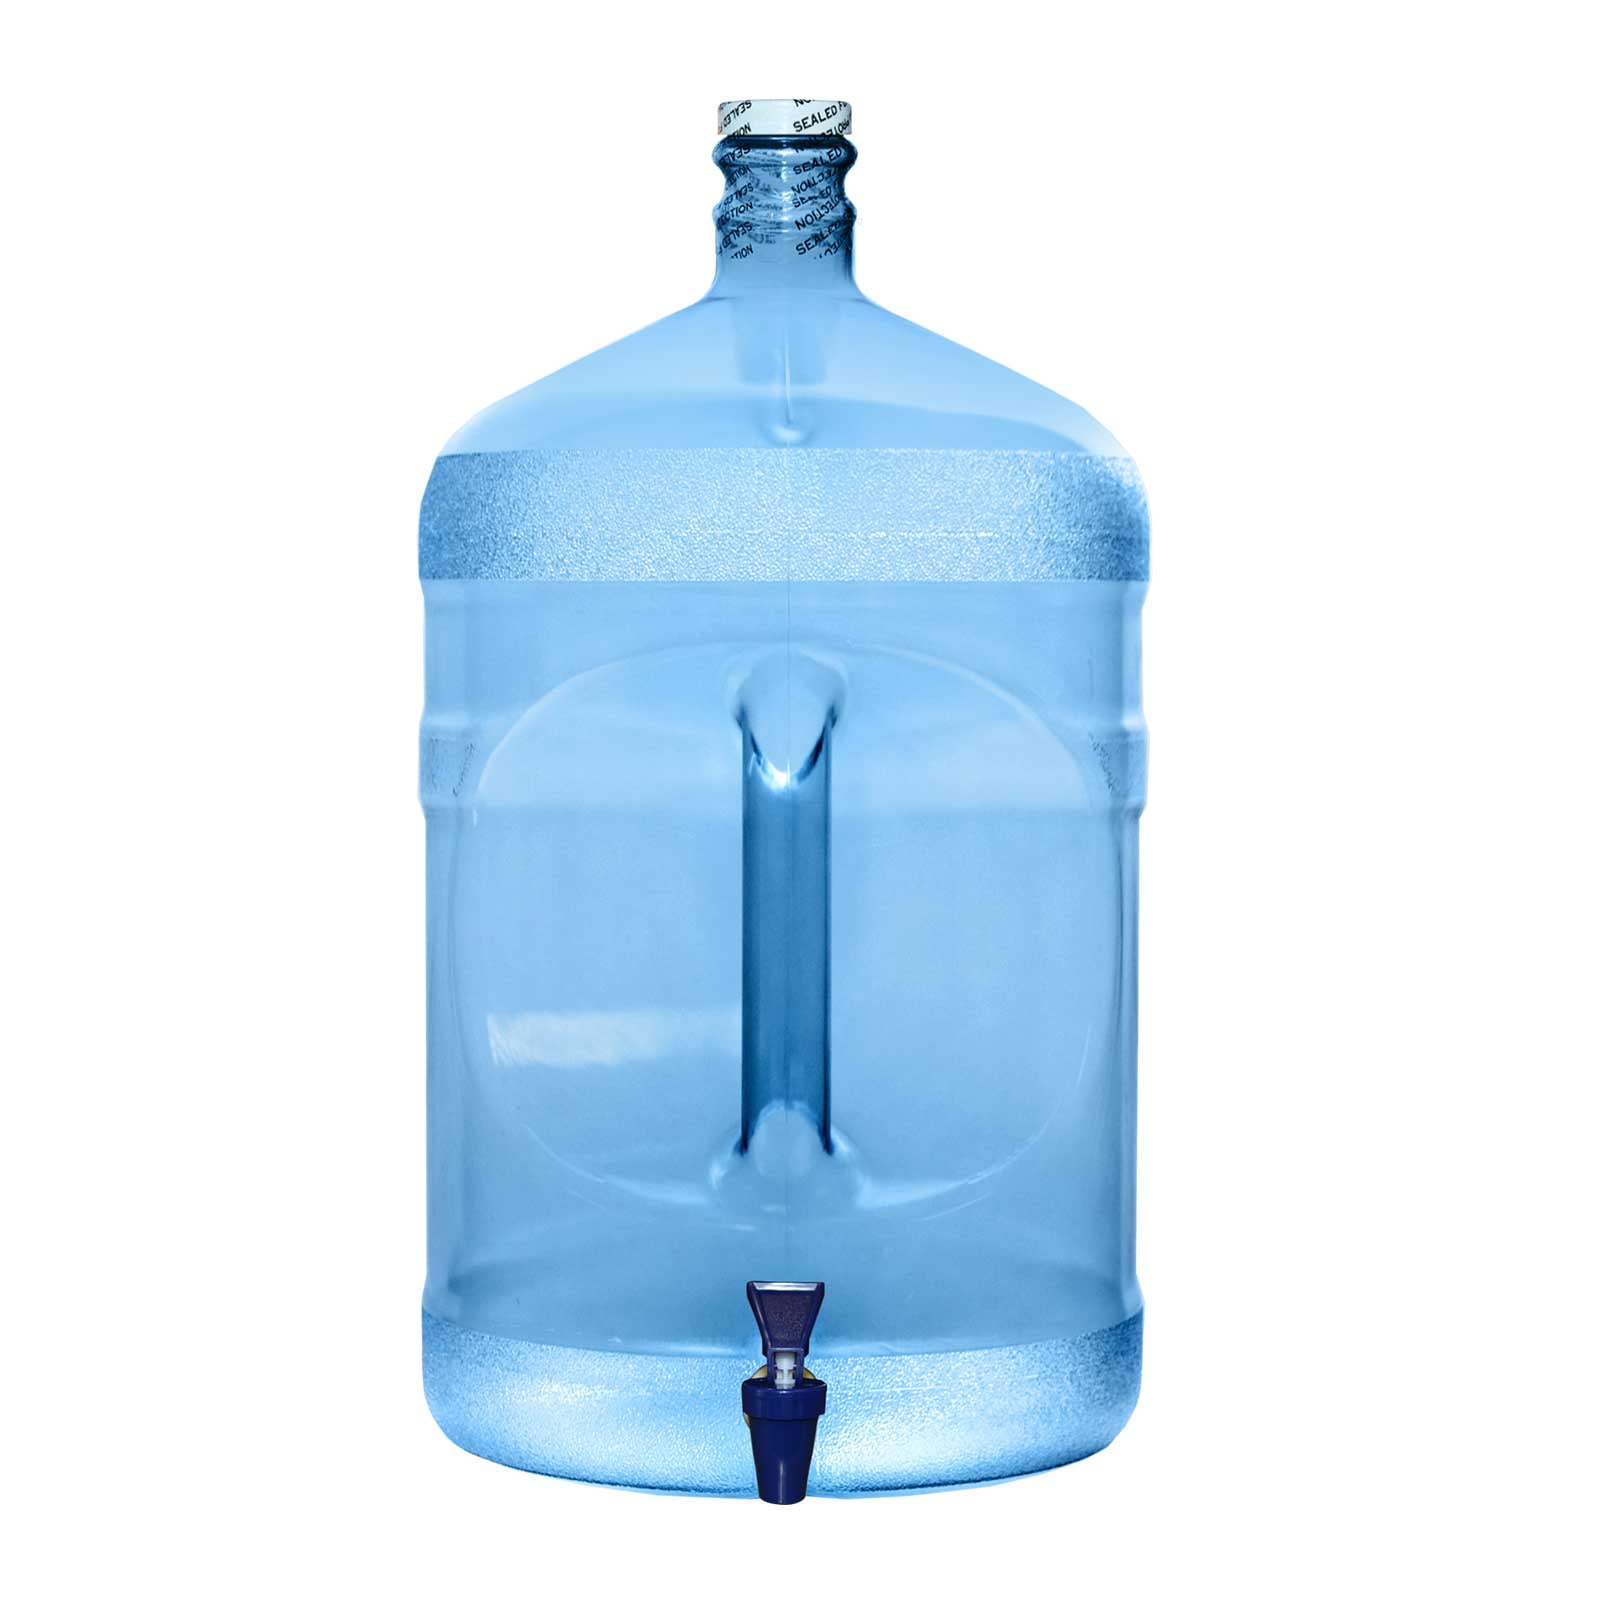 Collection 91+ Images 5 gallon glass water bottle for water cooler Latest